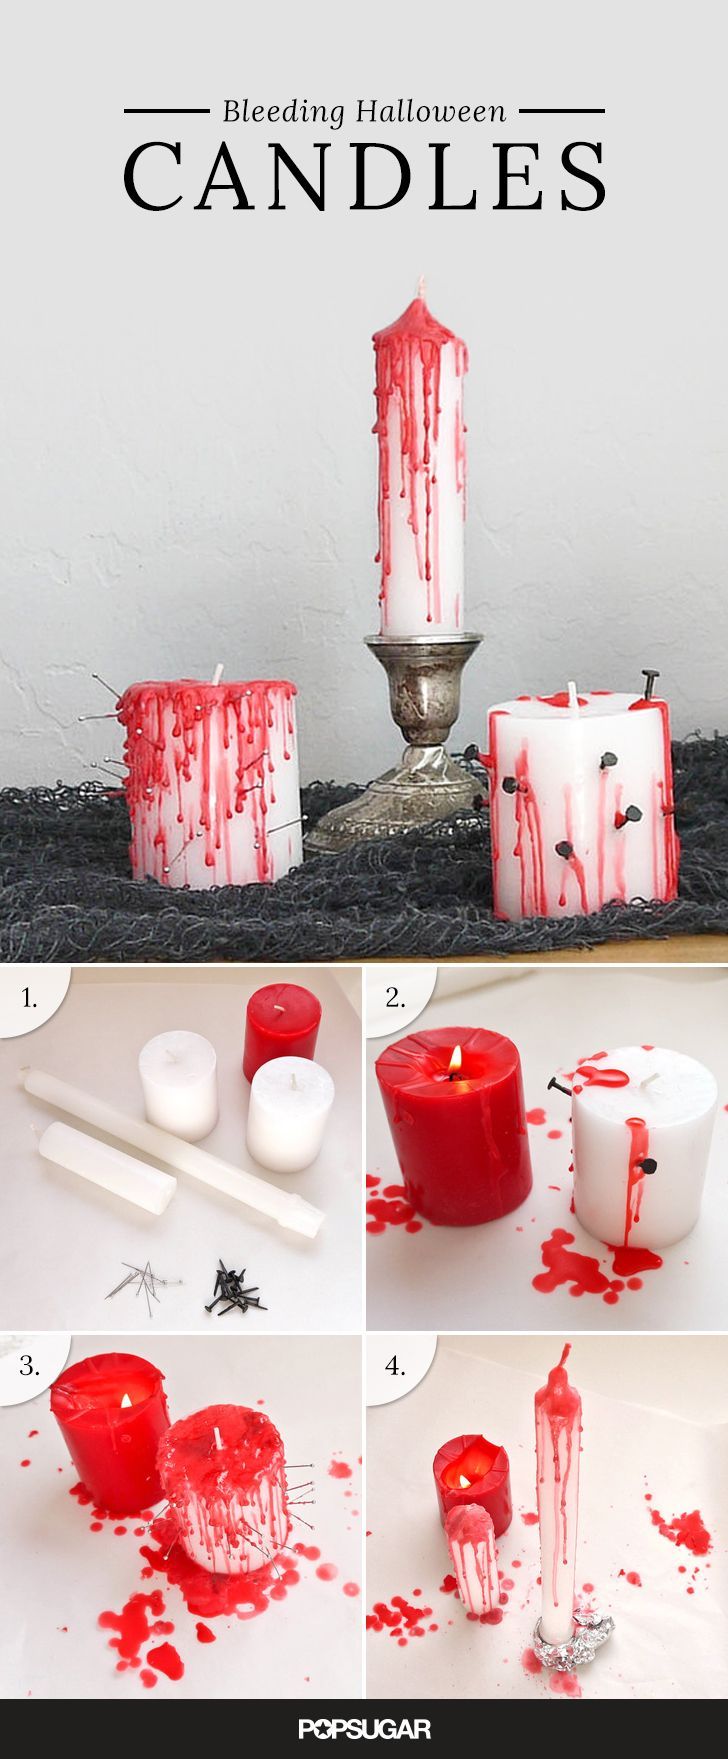 Transform dollar store candles into bleeding votives that really set the tone for an eerie evening of Halloween fun.